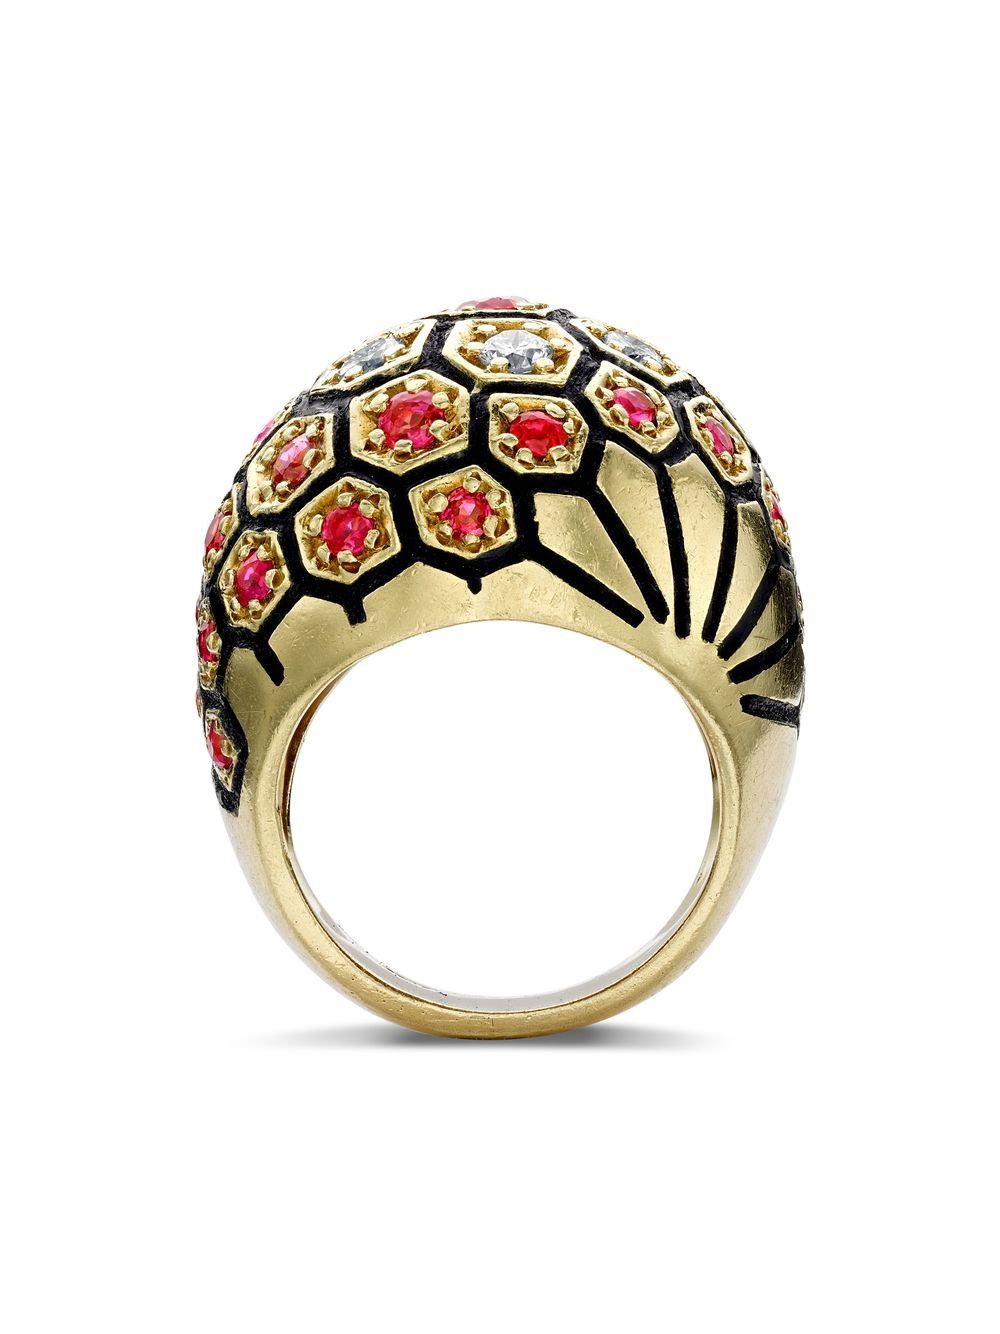 Pre-owned Pragnell Vintage 1970s 18kt Yellow Gold Retro Diamond And Ruby Honeycomb Dress Ring